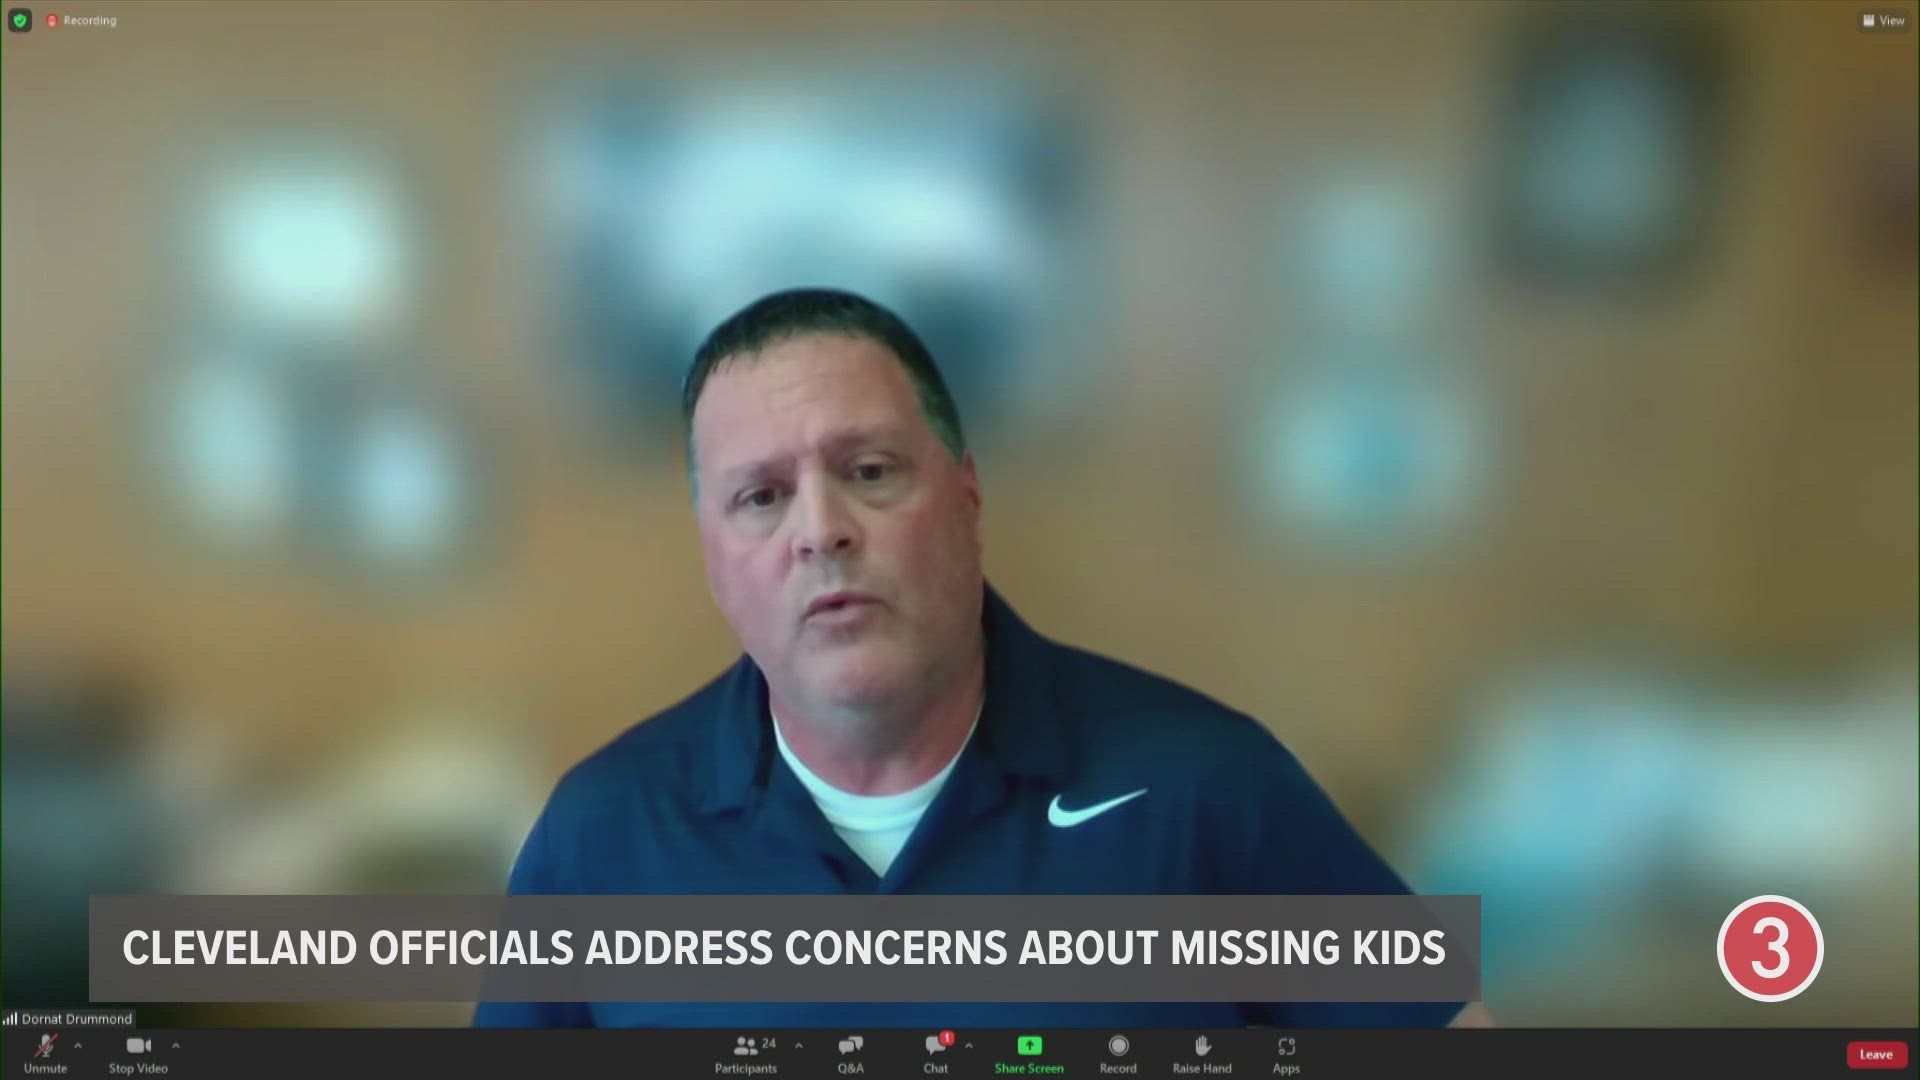 Officials from Cleveland, including Detective Kevin Callahan the Missing Persons Liaison of the Cleveland Division of Police addressed concerns about missing kids.